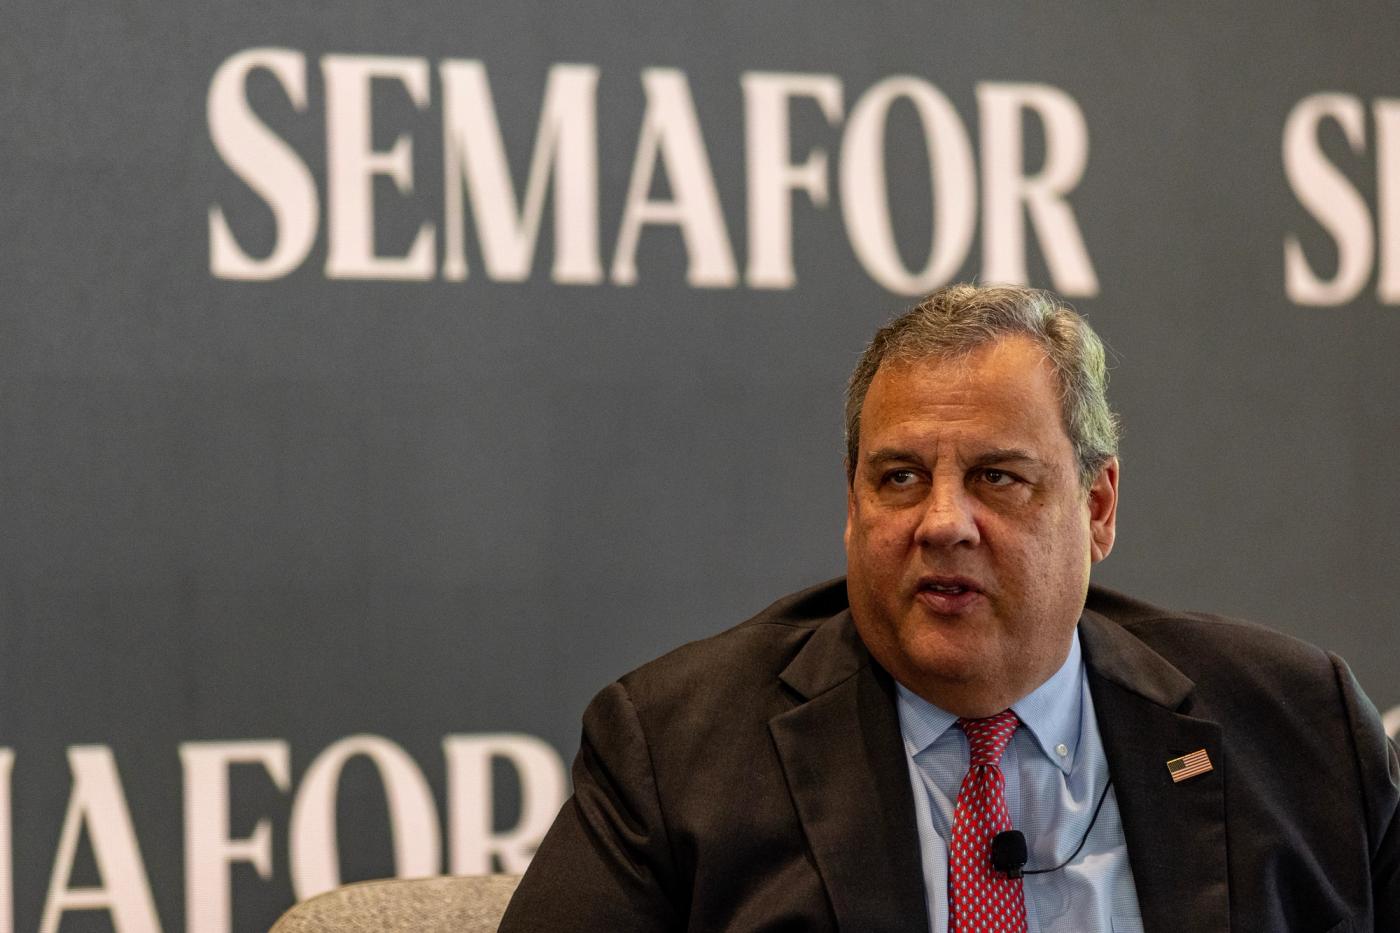 Chris Christie in conversation with Semafor